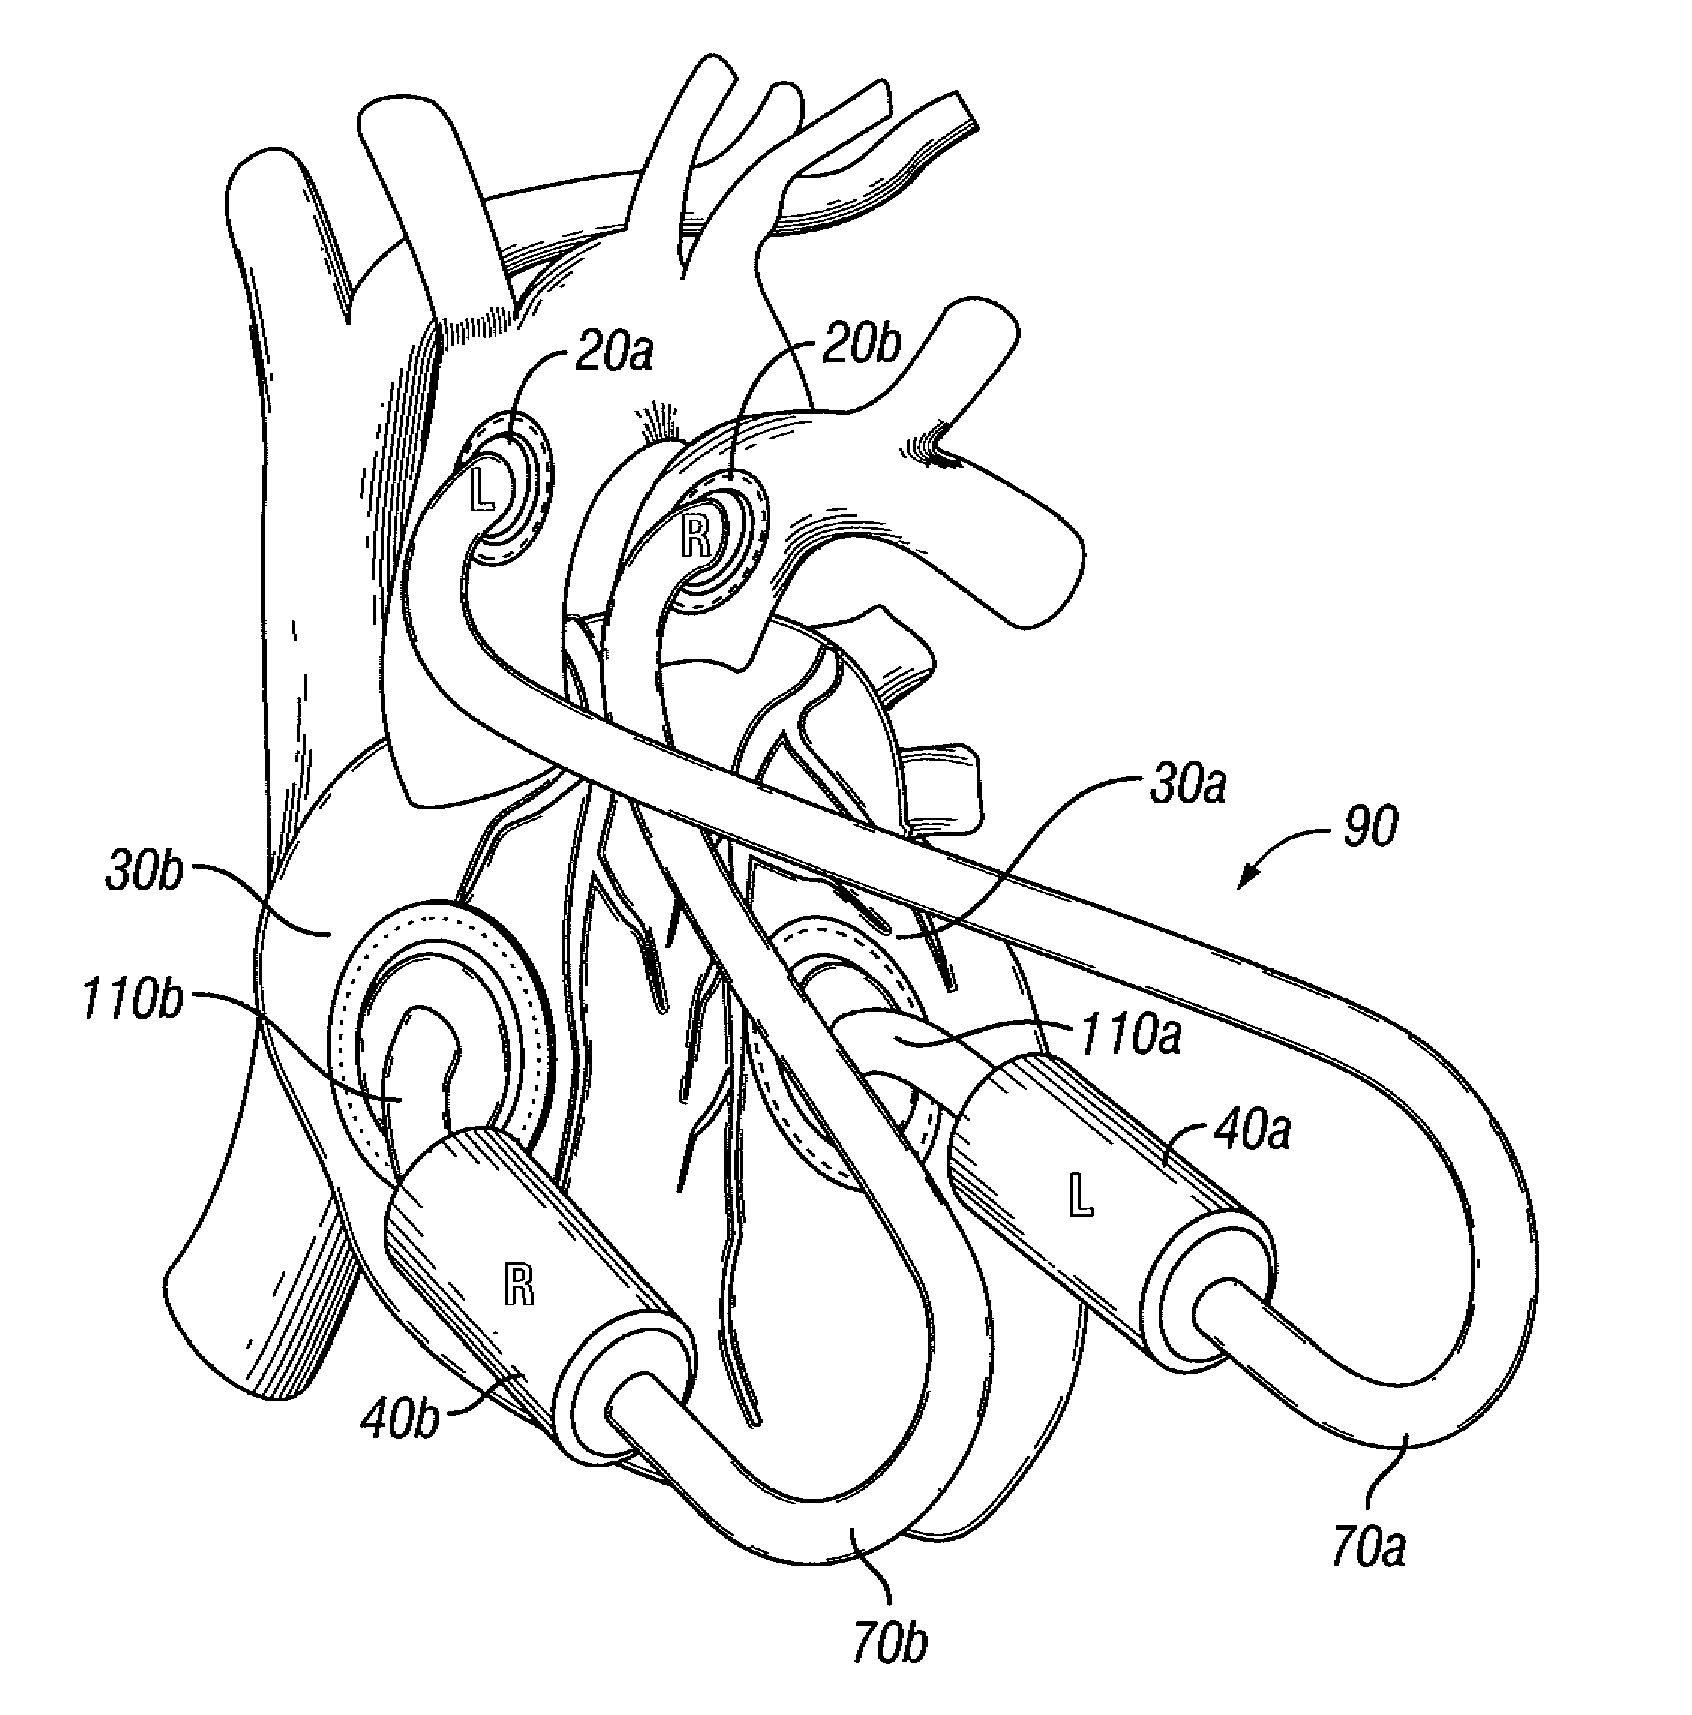 Total artificial heart system for auto-regulating flow and pressure